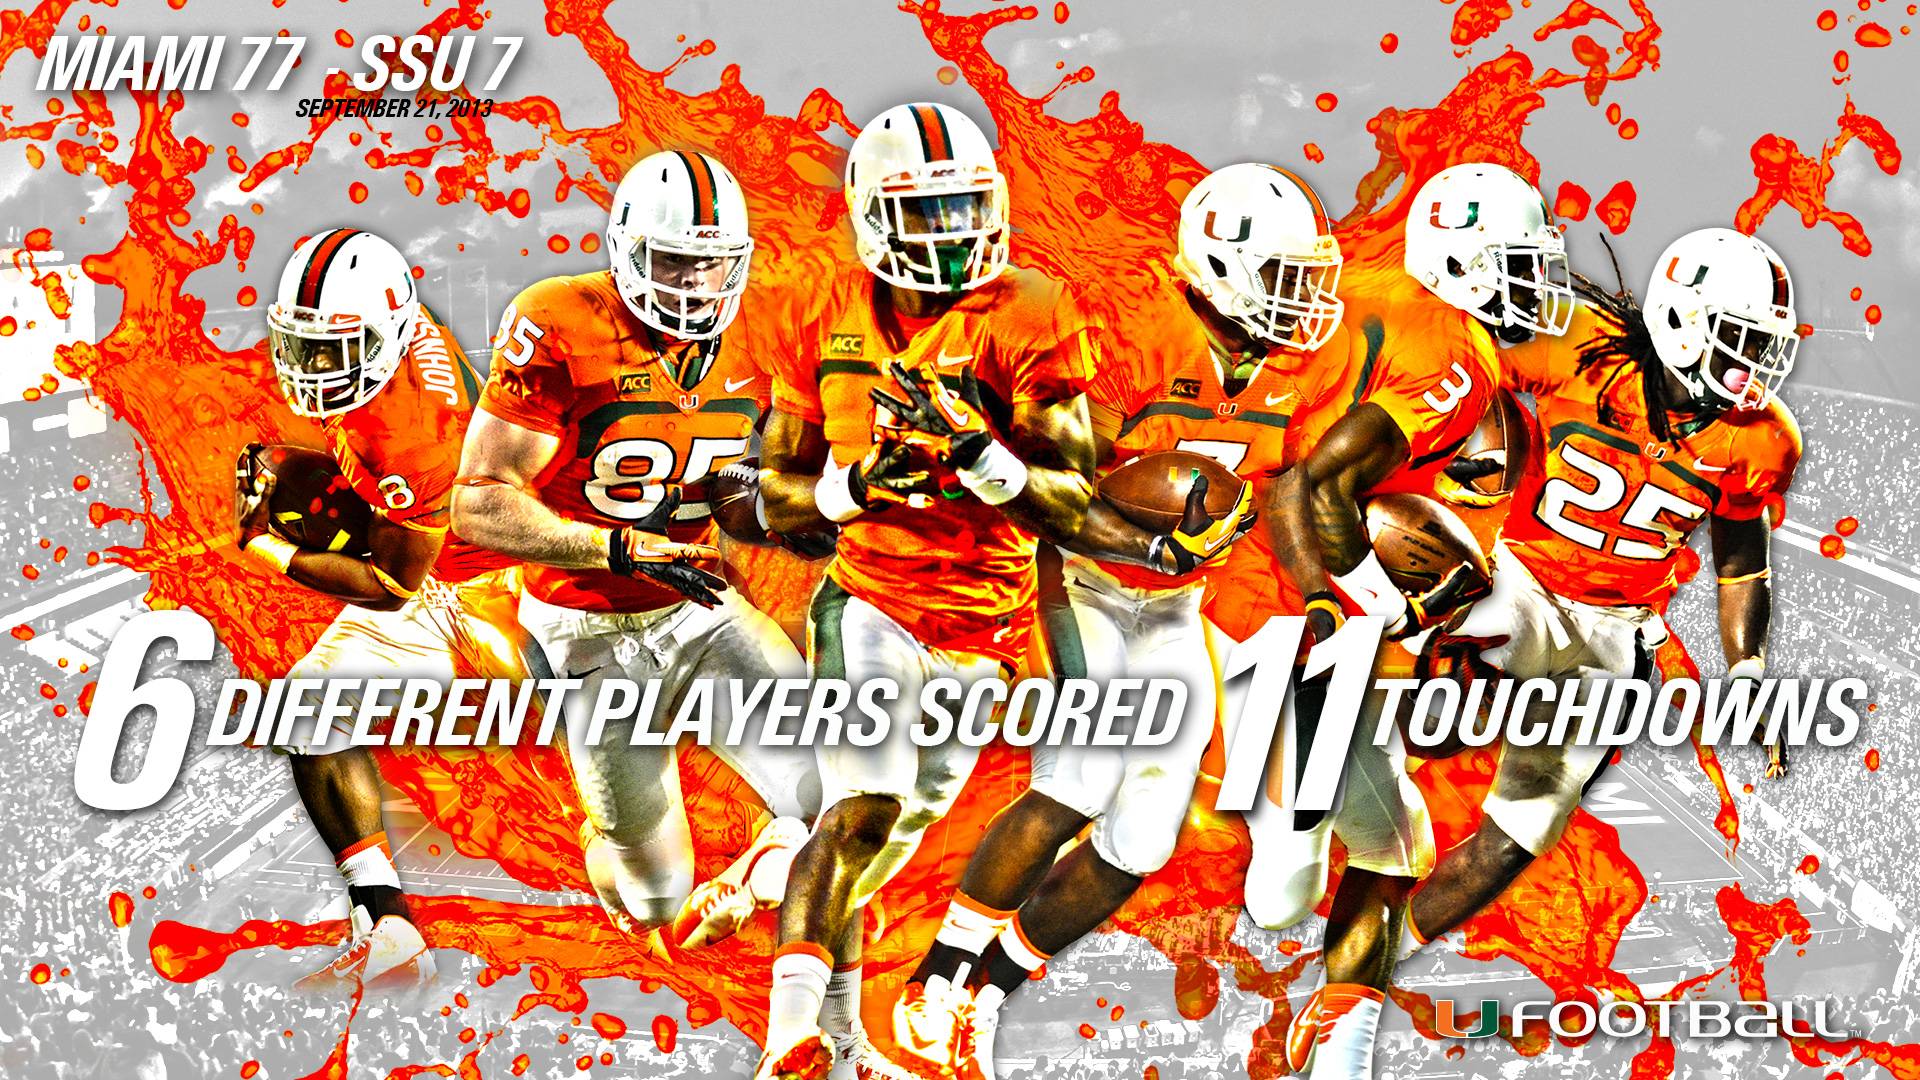 2013 14 Wallpaper Of Miami Hurricanes Official